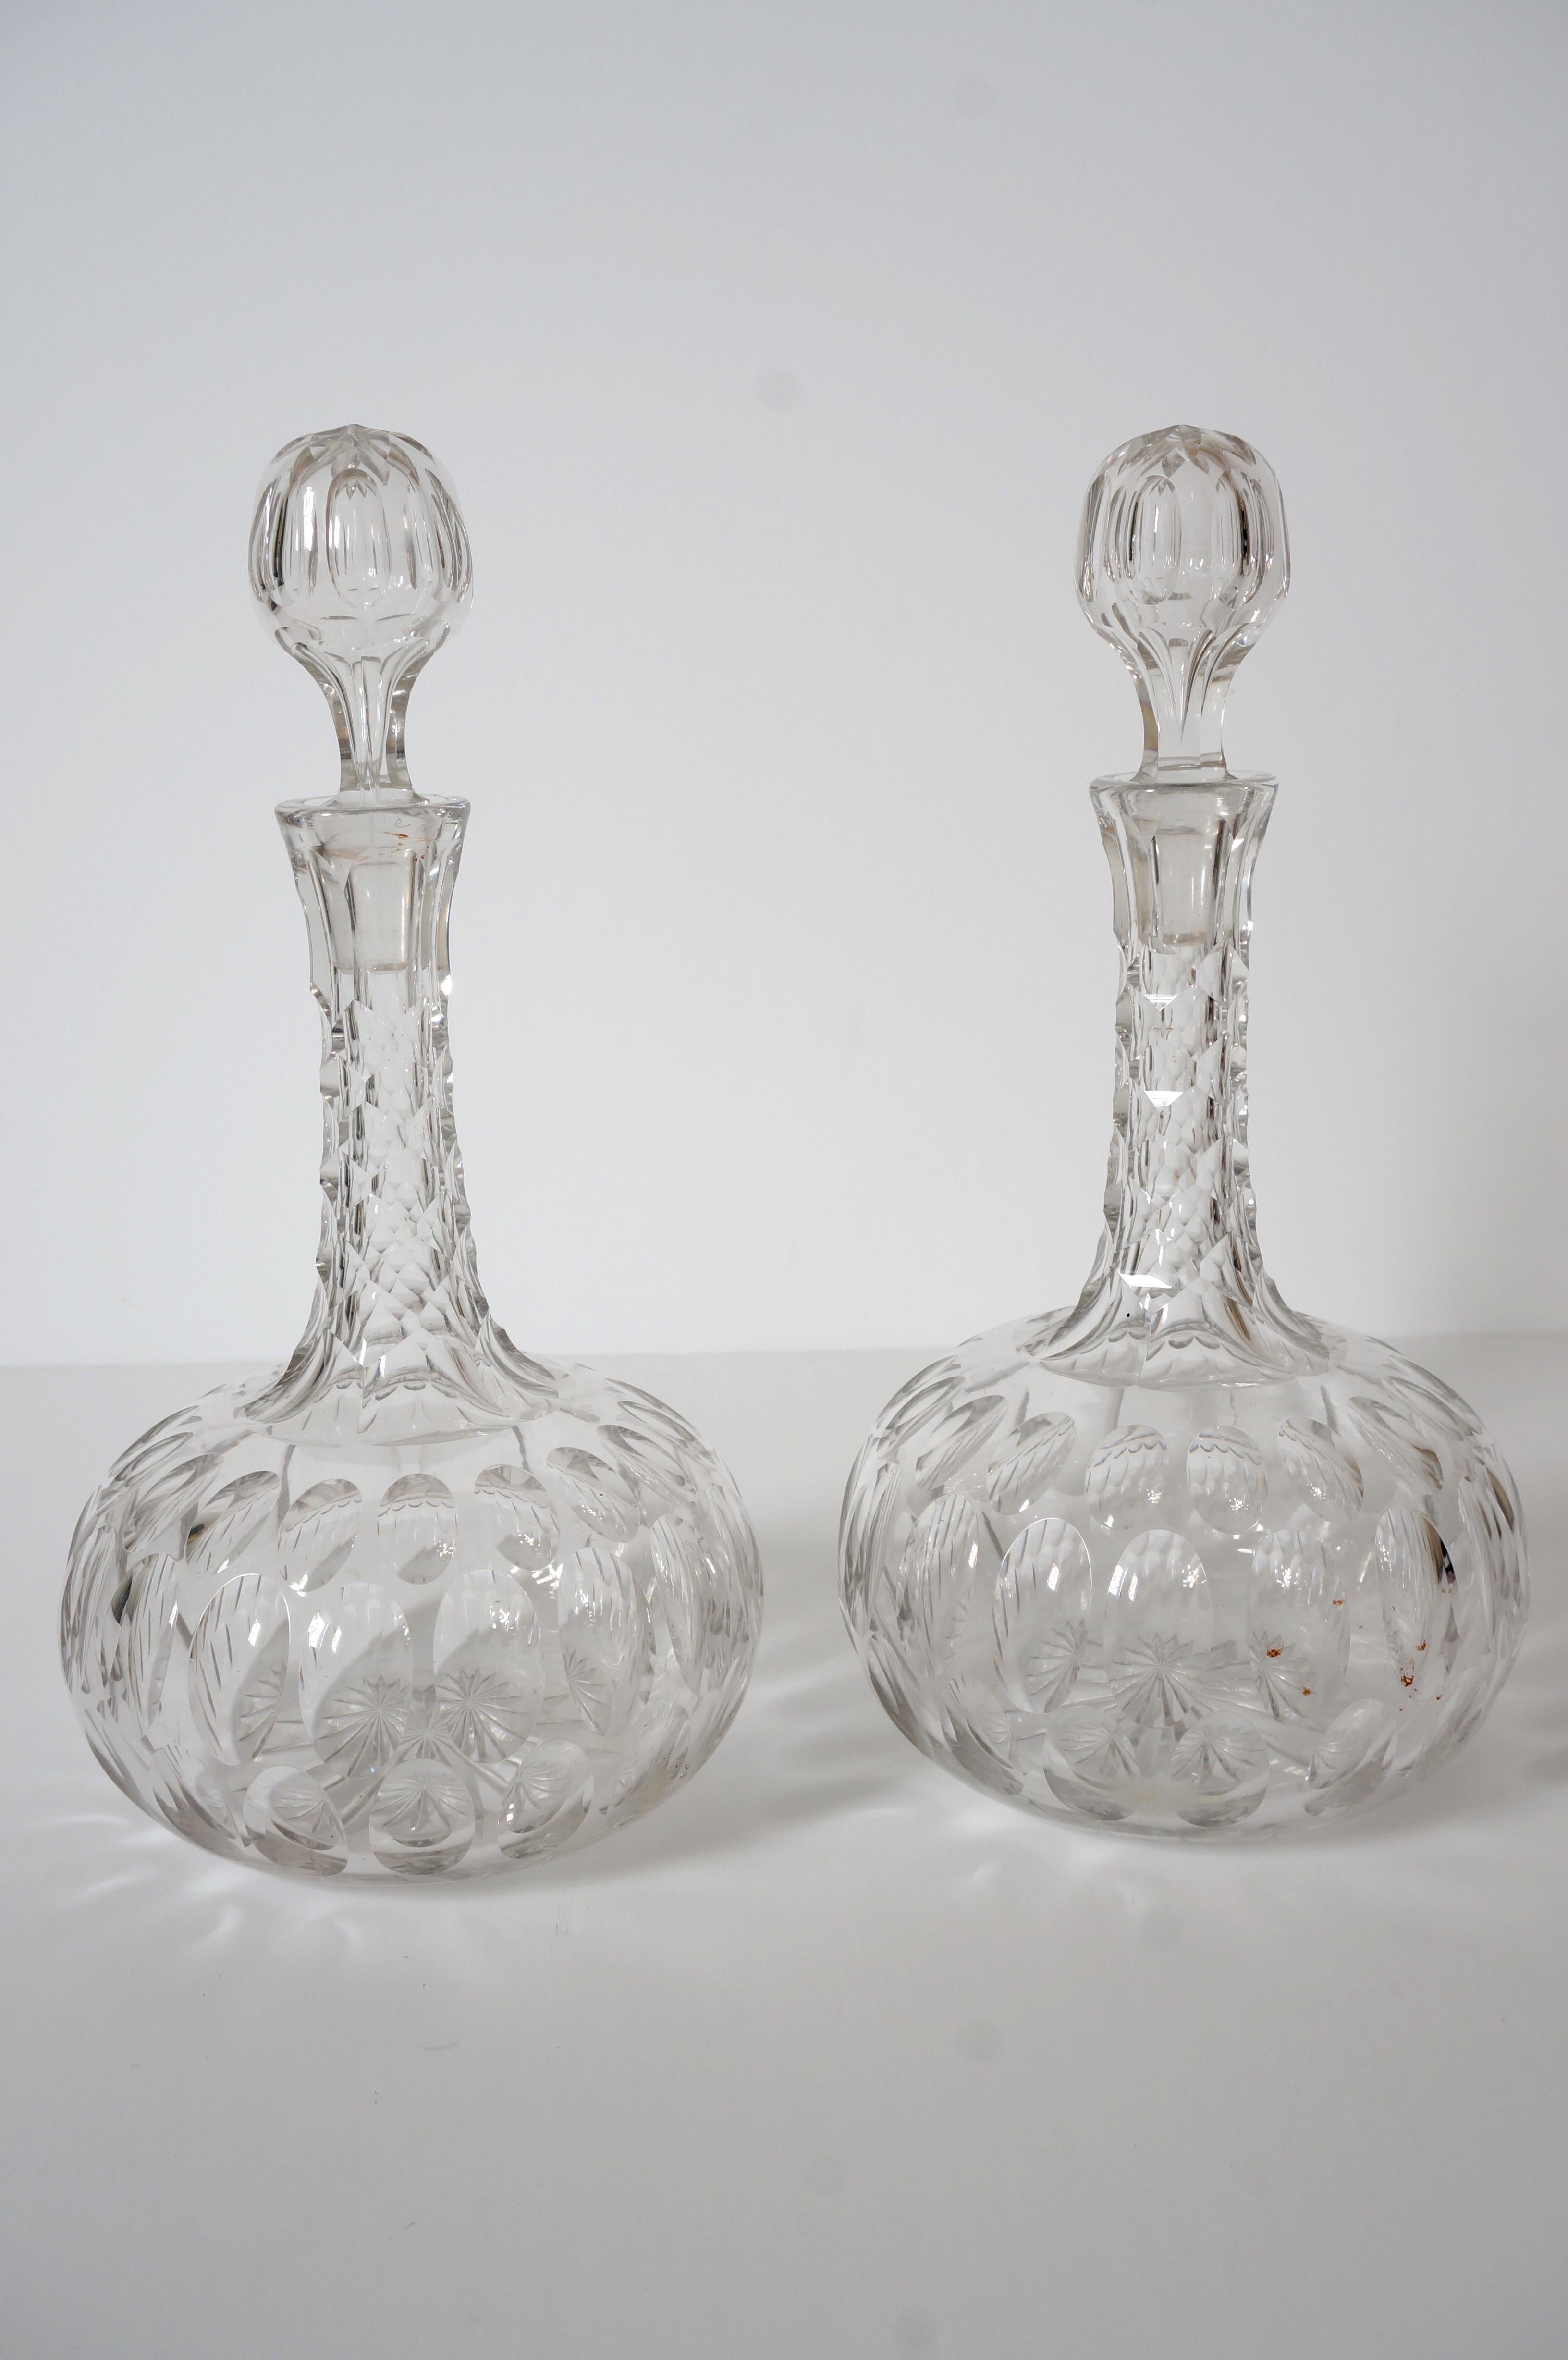 Regency Revival Set of Two Cut Crystal English Regency Style Decanters For Sale